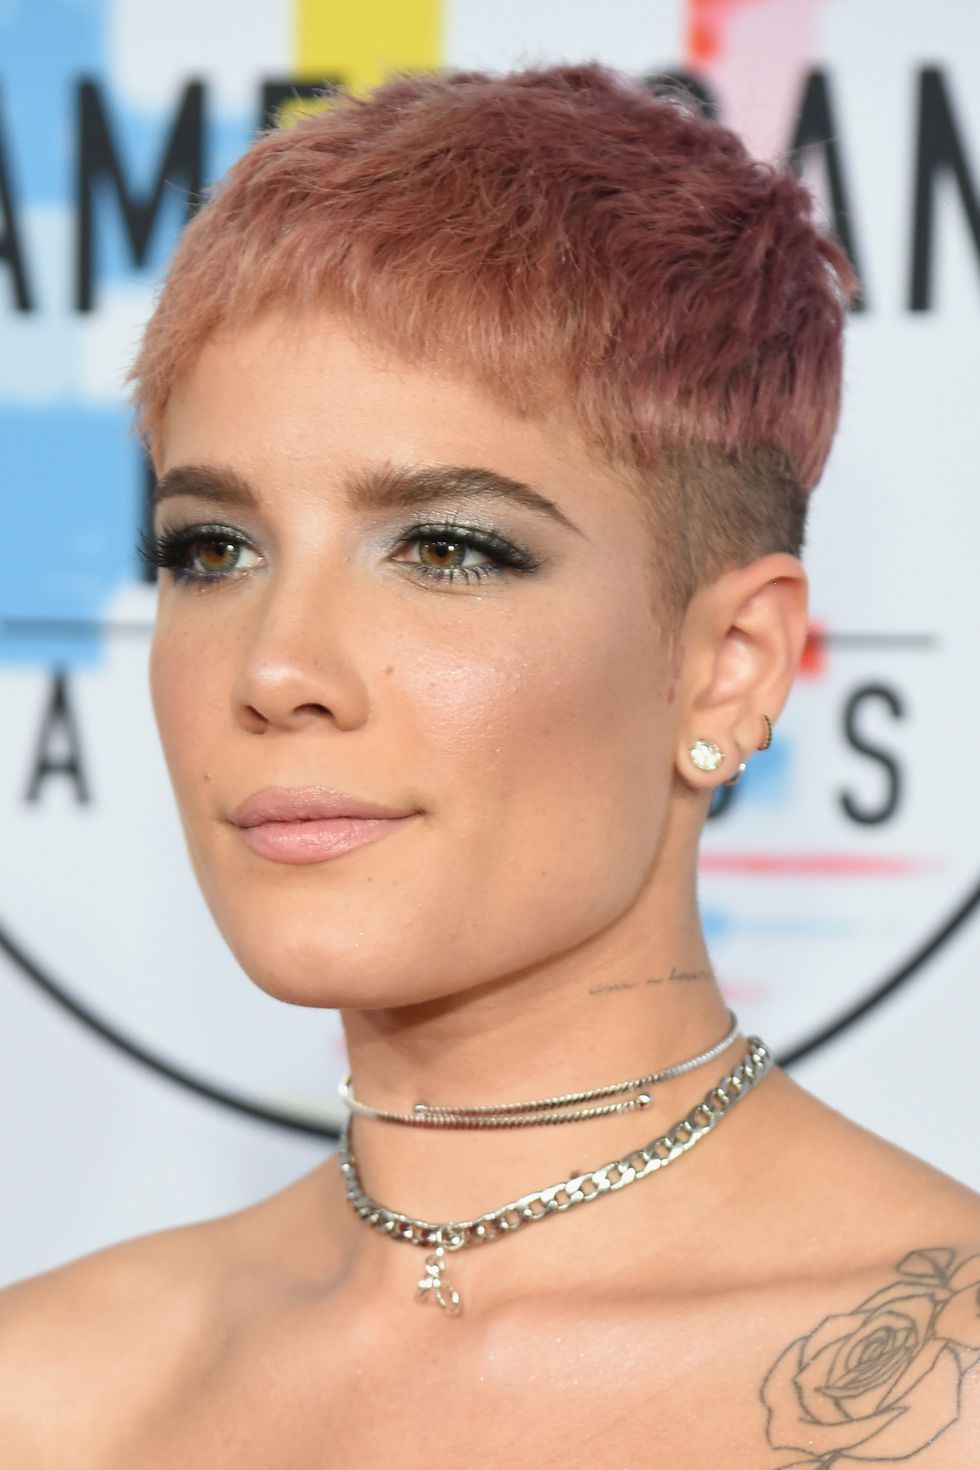 Short haircut, shaved sides, pixie cut, pink color